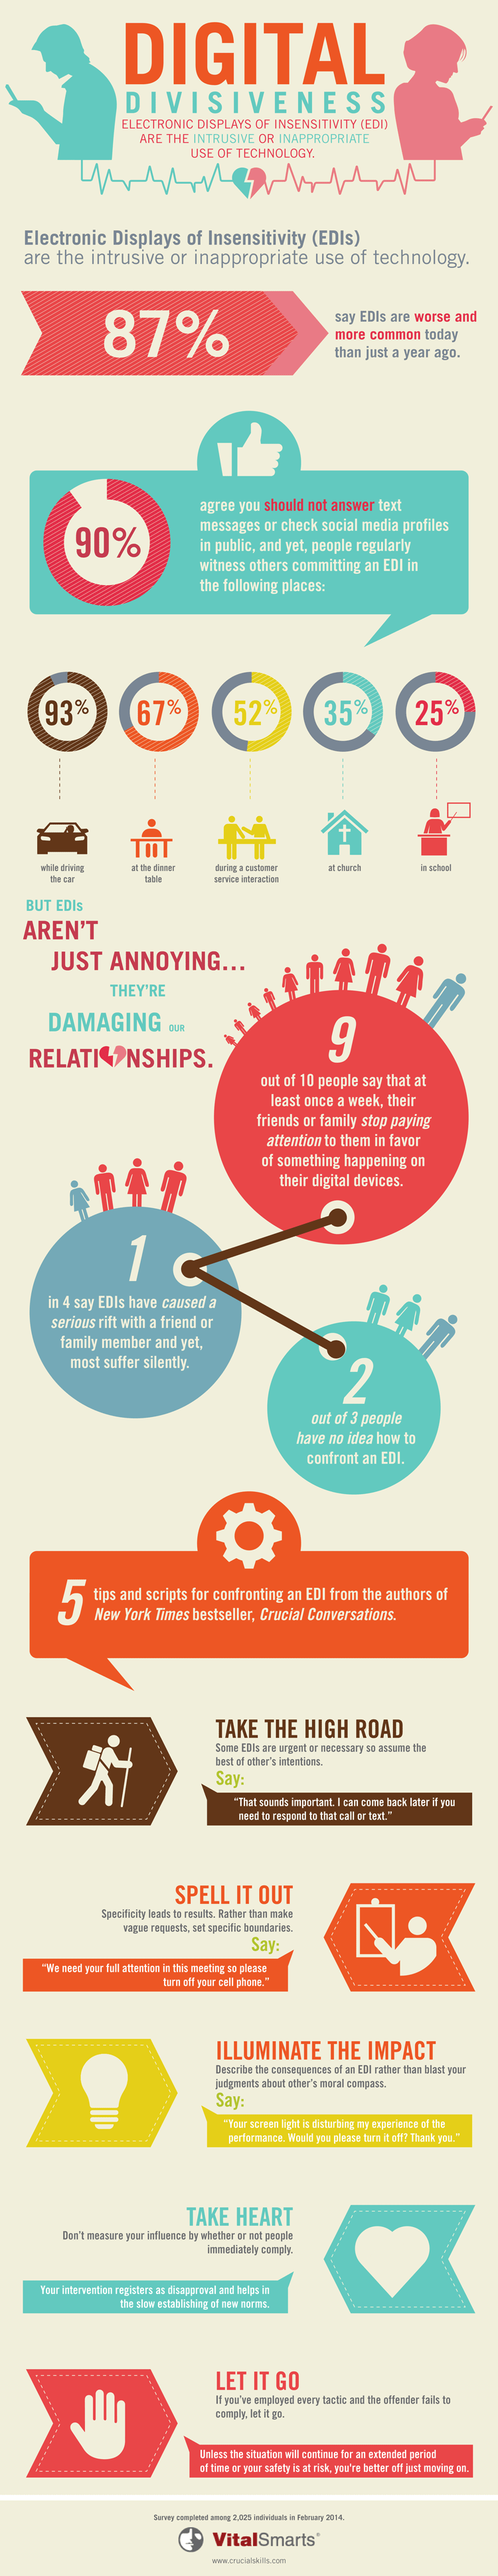 Digital Divisiveness: Electronic Displays of Insensitivity Take Toll on Relationships - infographic